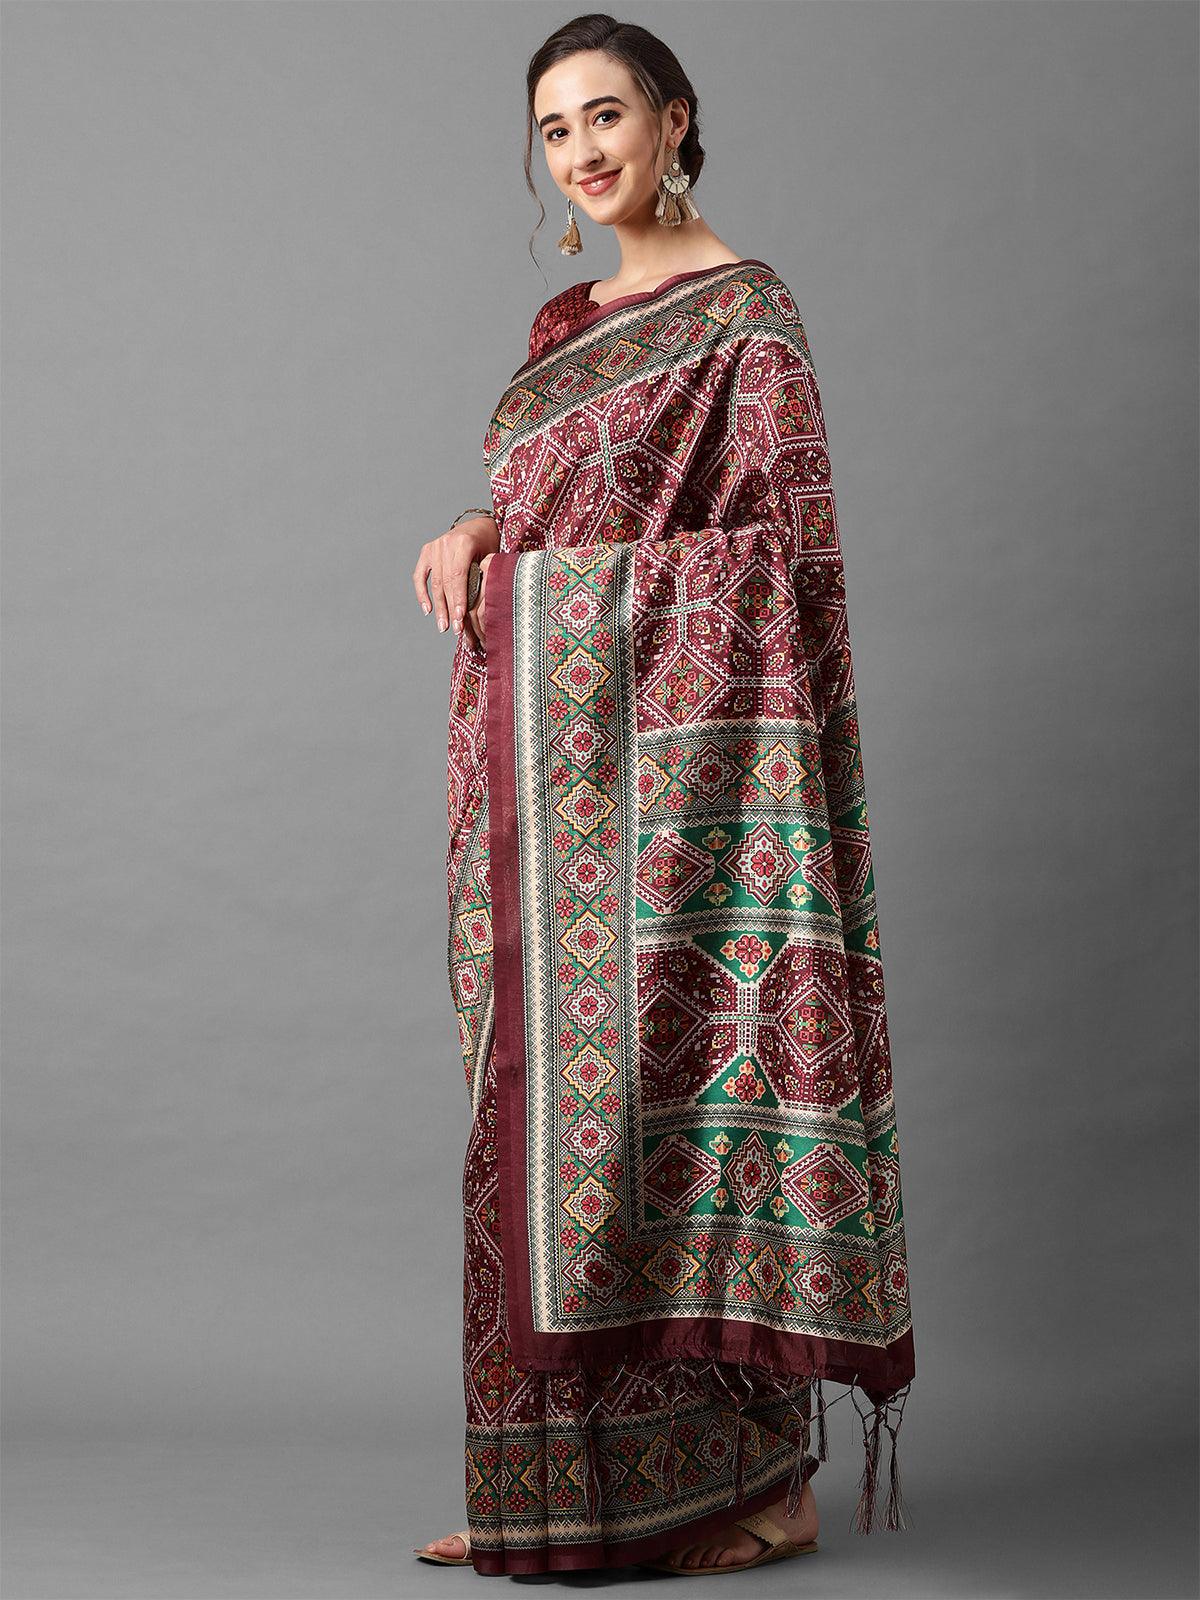 Women's Maroon Festive Patola Silk Patola Saree With Unstitched Blouse - Odette